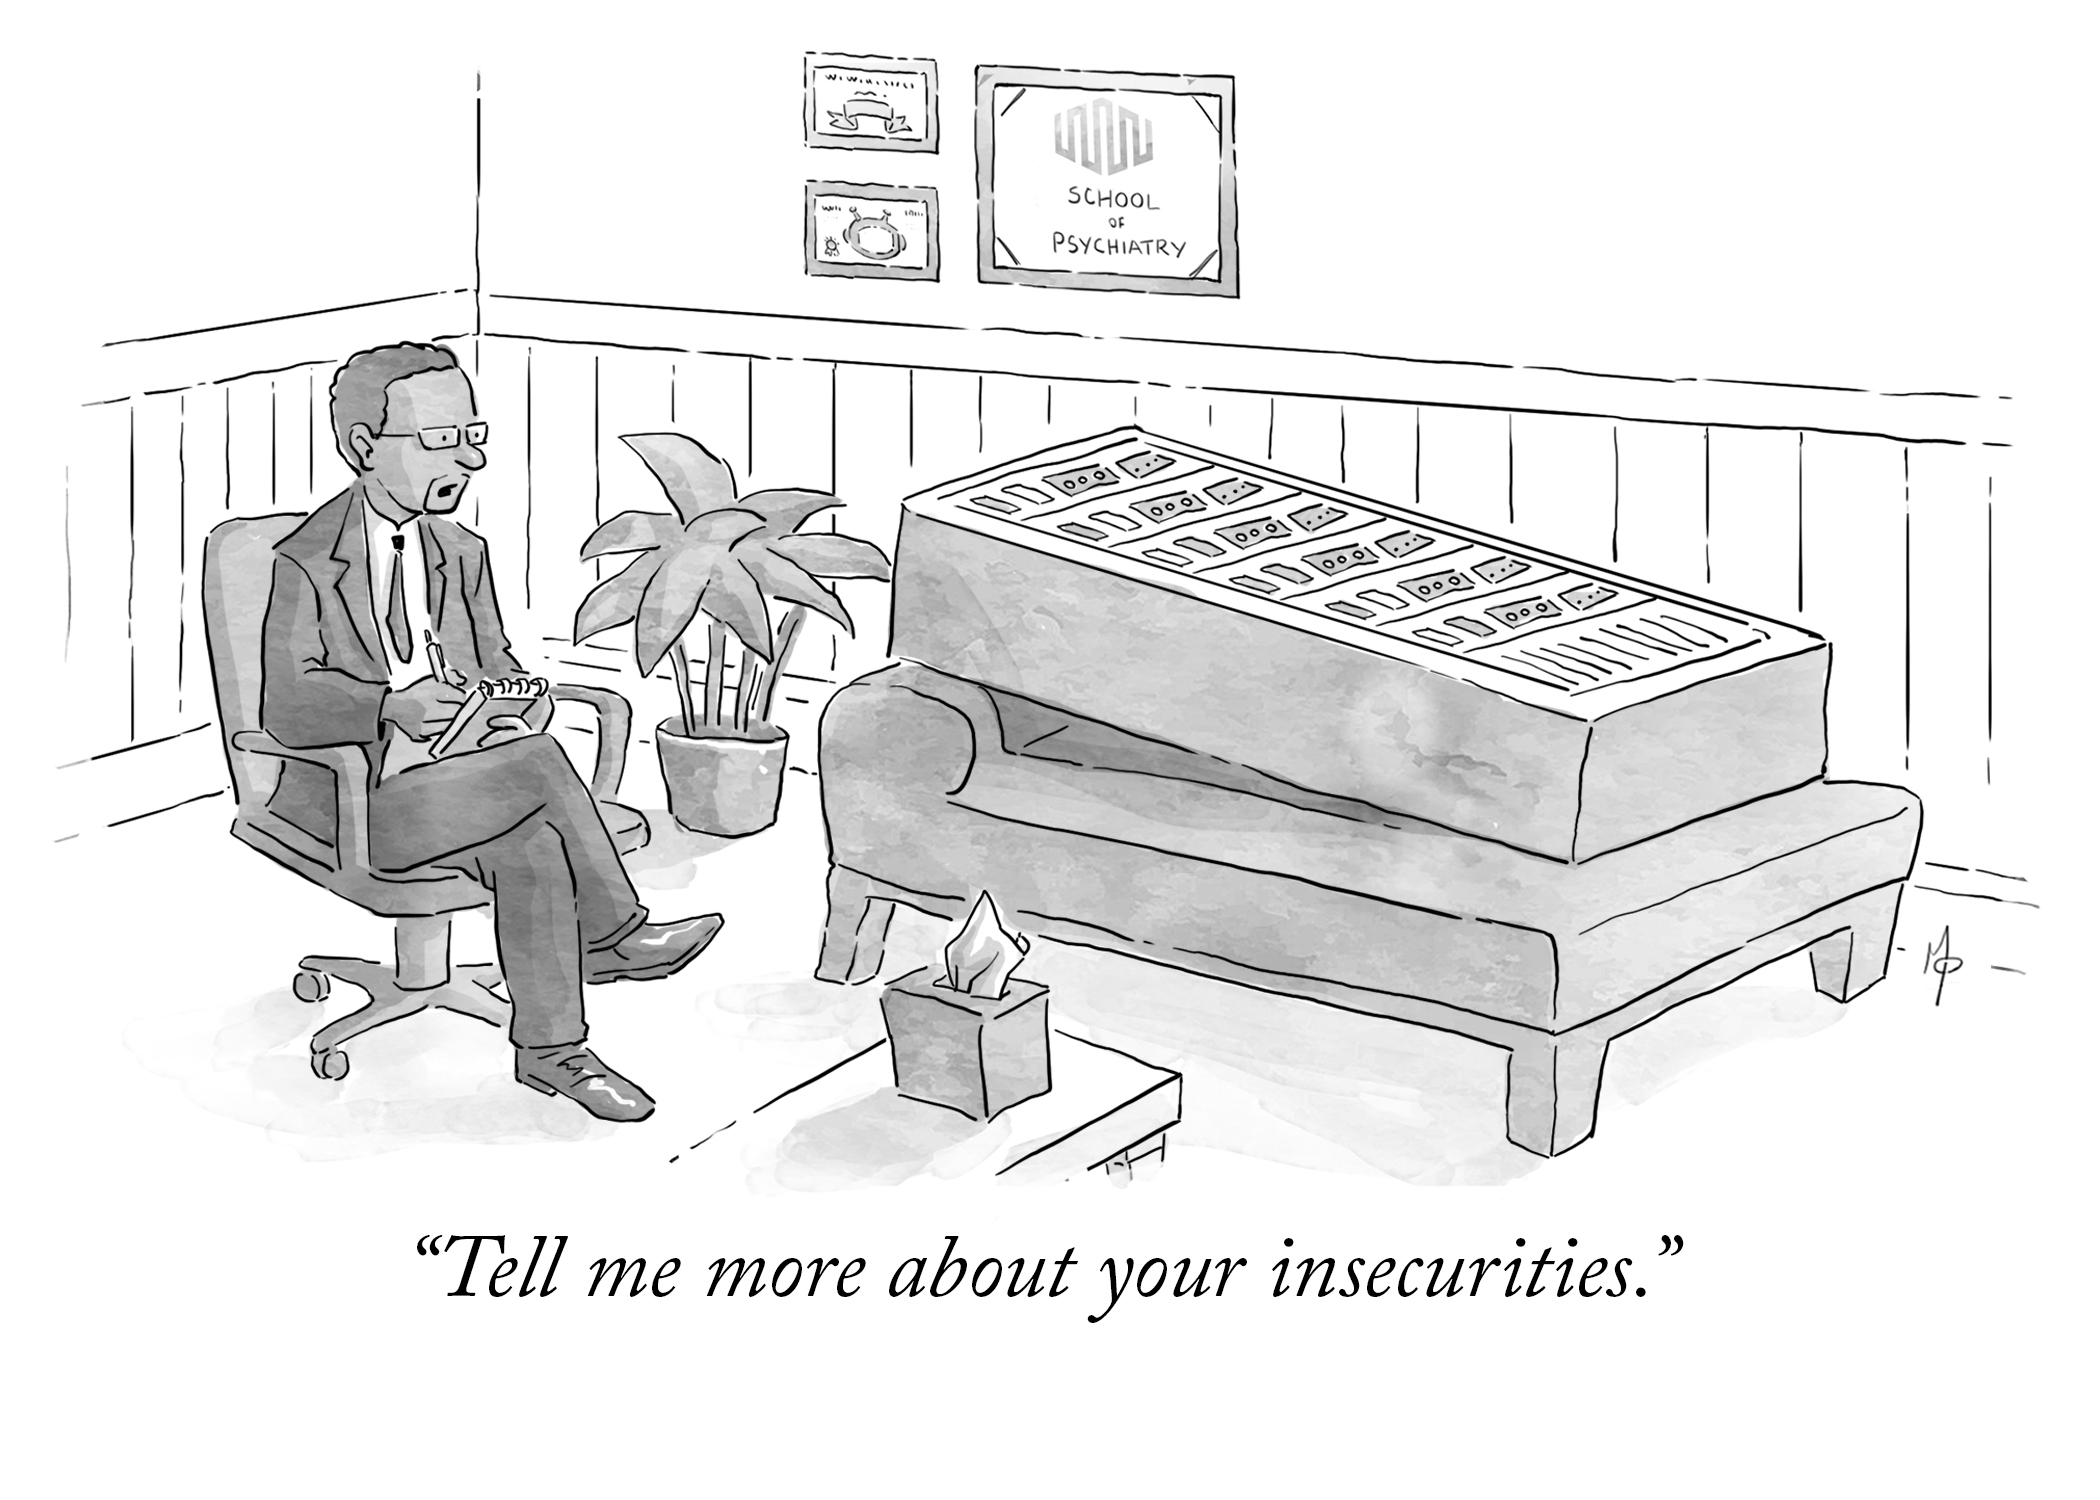 New Yorker style illustration of a psychiatrist talking to a server rack on his couch in his office. The caption reads: Even servers can be insecure.